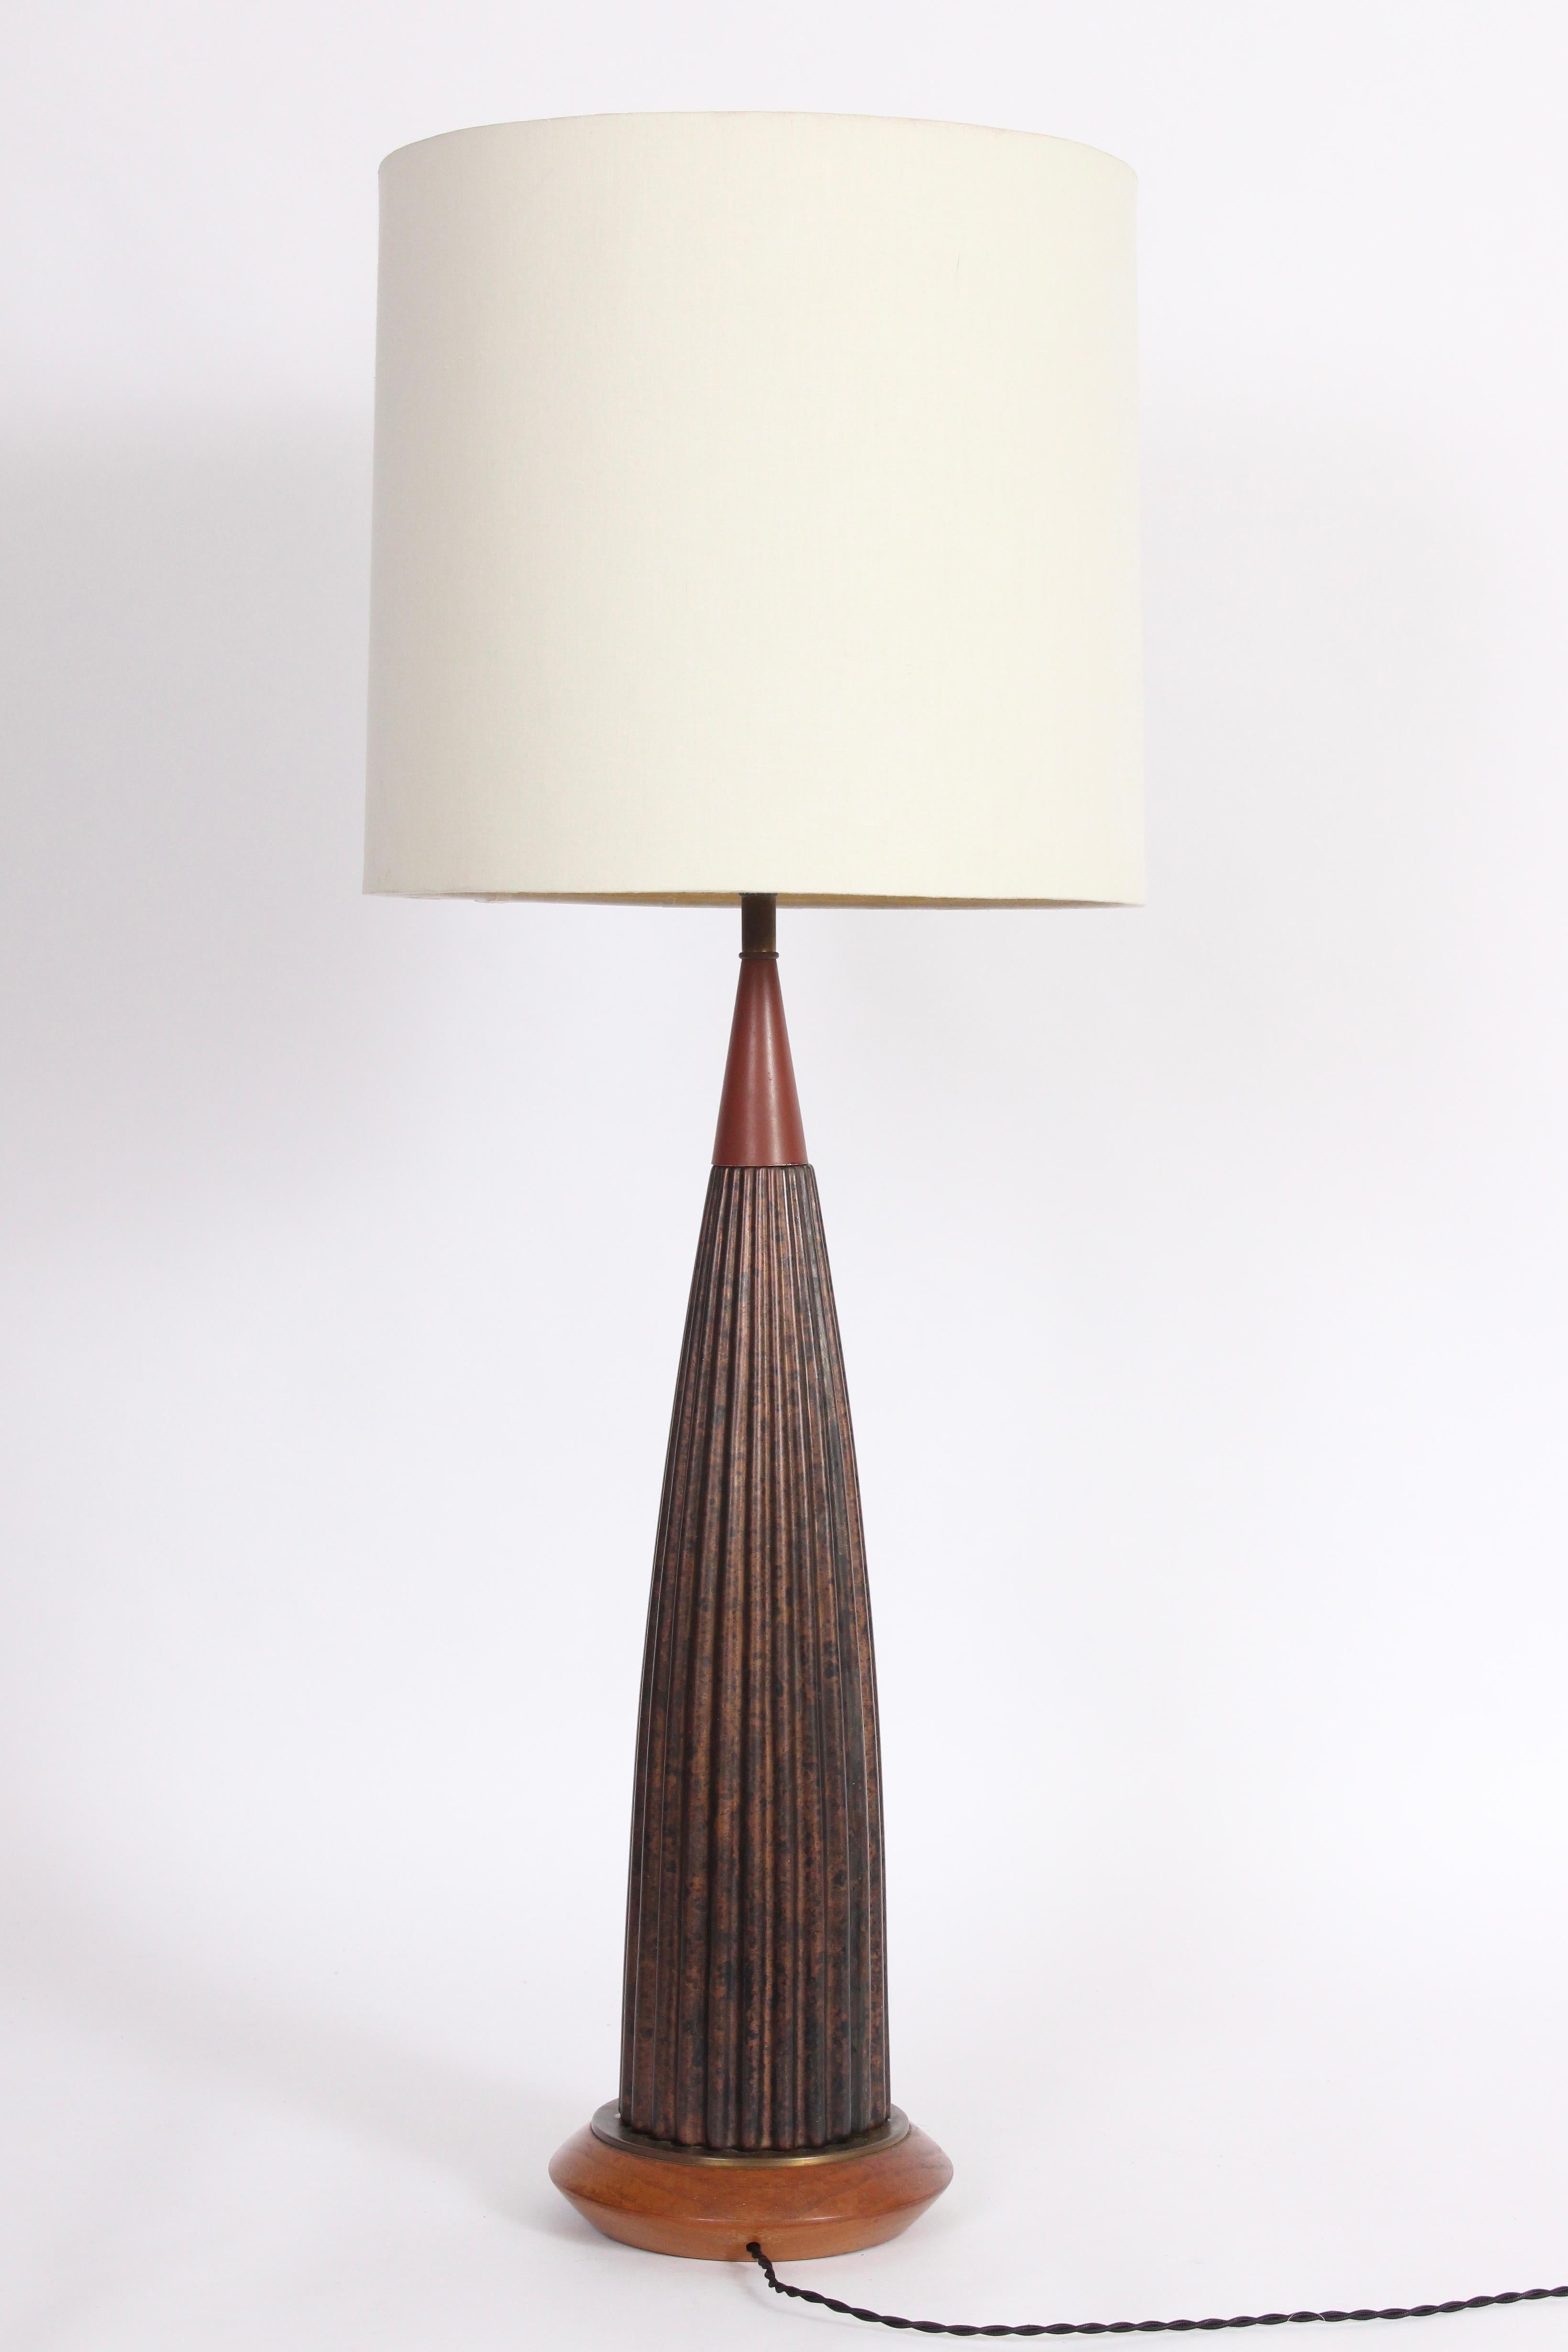 Tall Gerald Thurston attributed black and brown ribbed porcelain table lamp, 1950s. Featuring a missile form in dark bronze and silver glazed coloration detailed with wood neck and base. Shade shown for display only (13 H x 13 D top x 14 D bottom).